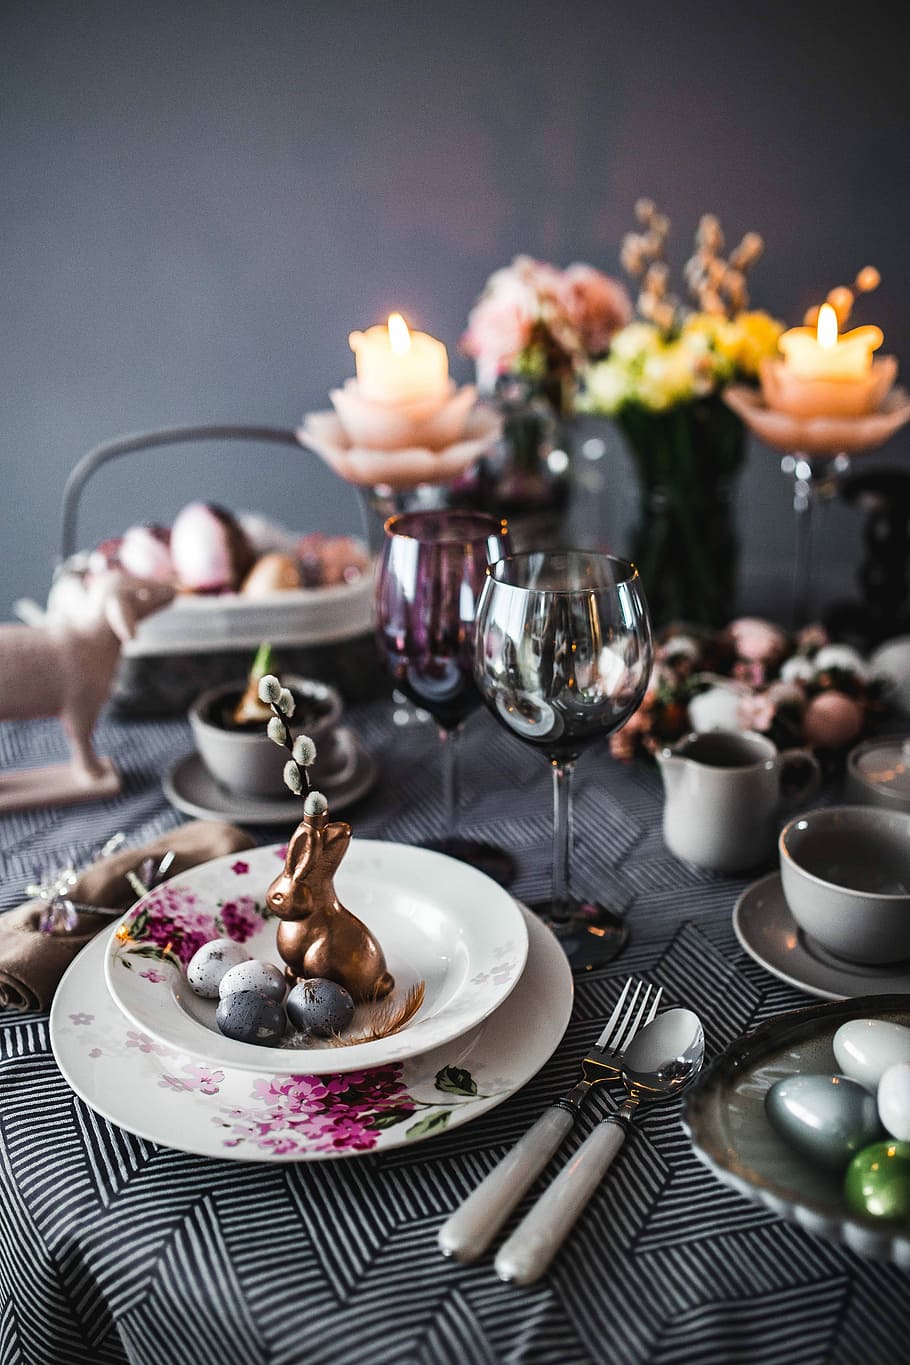 HD wallpaper: Round dinner table decorated with easter motifs